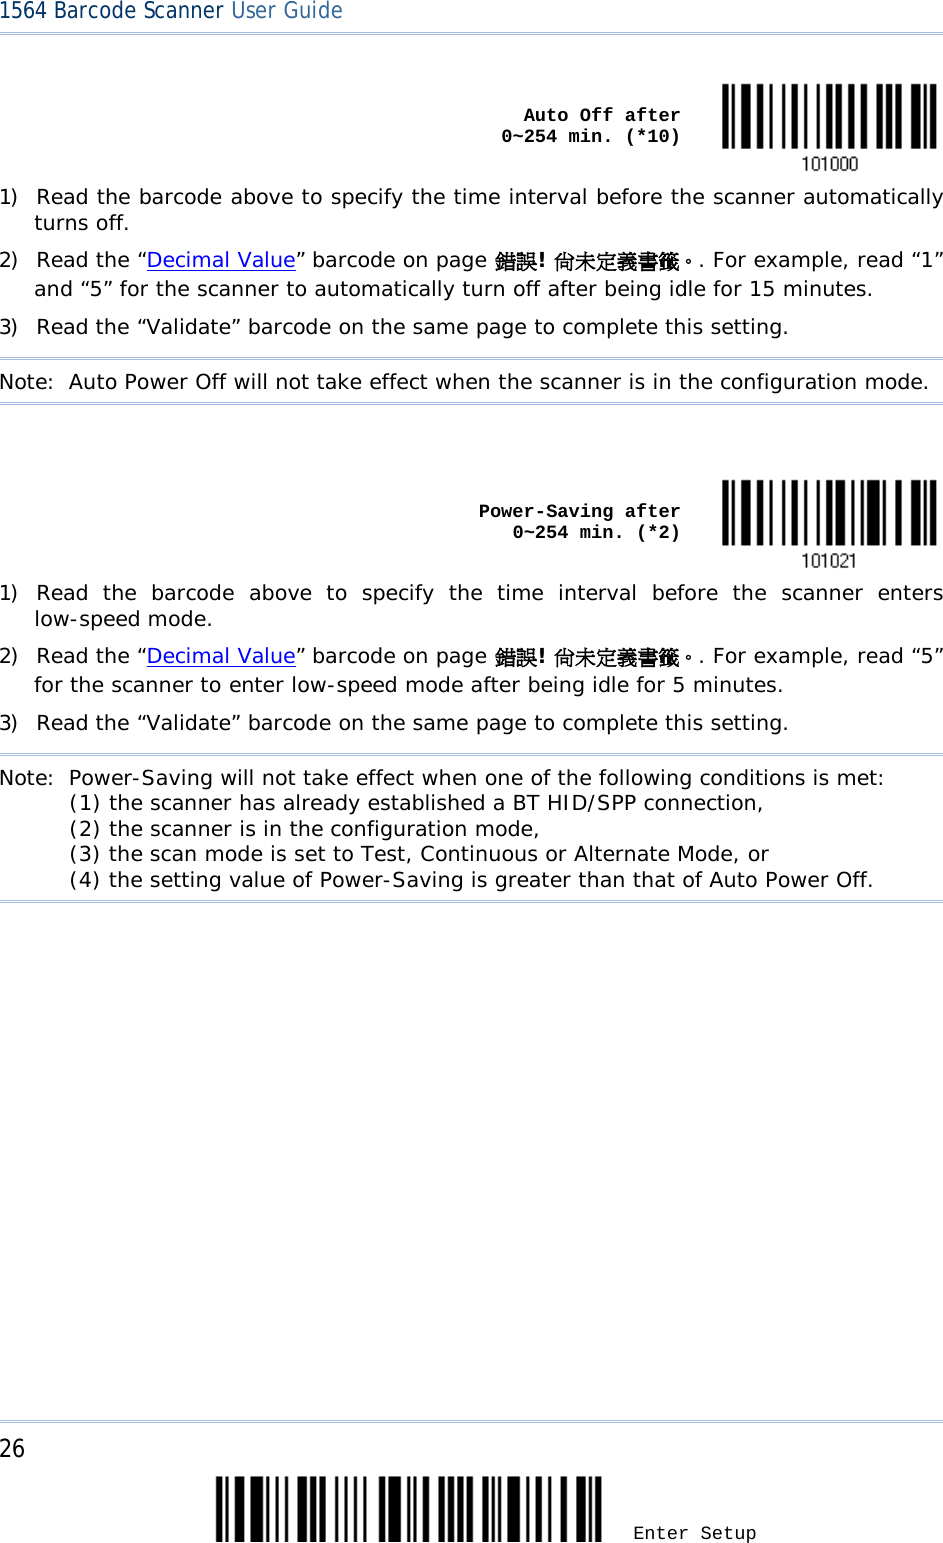 26 Enter Setup 1564 Barcode Scanner User Guide     Auto Off after            0~254 min. (*10)  1) Read the barcode above to specify the time interval before the scanner automatically turns off. 2) Read the “Decimal Value” barcode on page 錯誤! 尚未定義書籤。. For example, read “1” and “5” for the scanner to automatically turn off after being idle for 15 minutes.  3) Read the “Validate” barcode on the same page to complete this setting. Note: Auto Power Off will not take effect when the scanner is in the configuration mode.     Power-Saving after            0~254 min. (*2)  1) Read the barcode above to specify the time interval before the scanner enters low-speed mode. 2) Read the “Decimal Value” barcode on page 錯誤! 尚未定義書籤。. For example, read “5” for the scanner to enter low-speed mode after being idle for 5 minutes.  3) Read the “Validate” barcode on the same page to complete this setting. Note: Power-Saving will not take effect when one of the following conditions is met:  (1) the scanner has already established a BT HID/SPP connection,     (2) the scanner is in the configuration mode,       (3) the scan mode is set to Test, Continuous or Alternate Mode, or     (4) the setting value of Power-Saving is greater than that of Auto Power Off.  